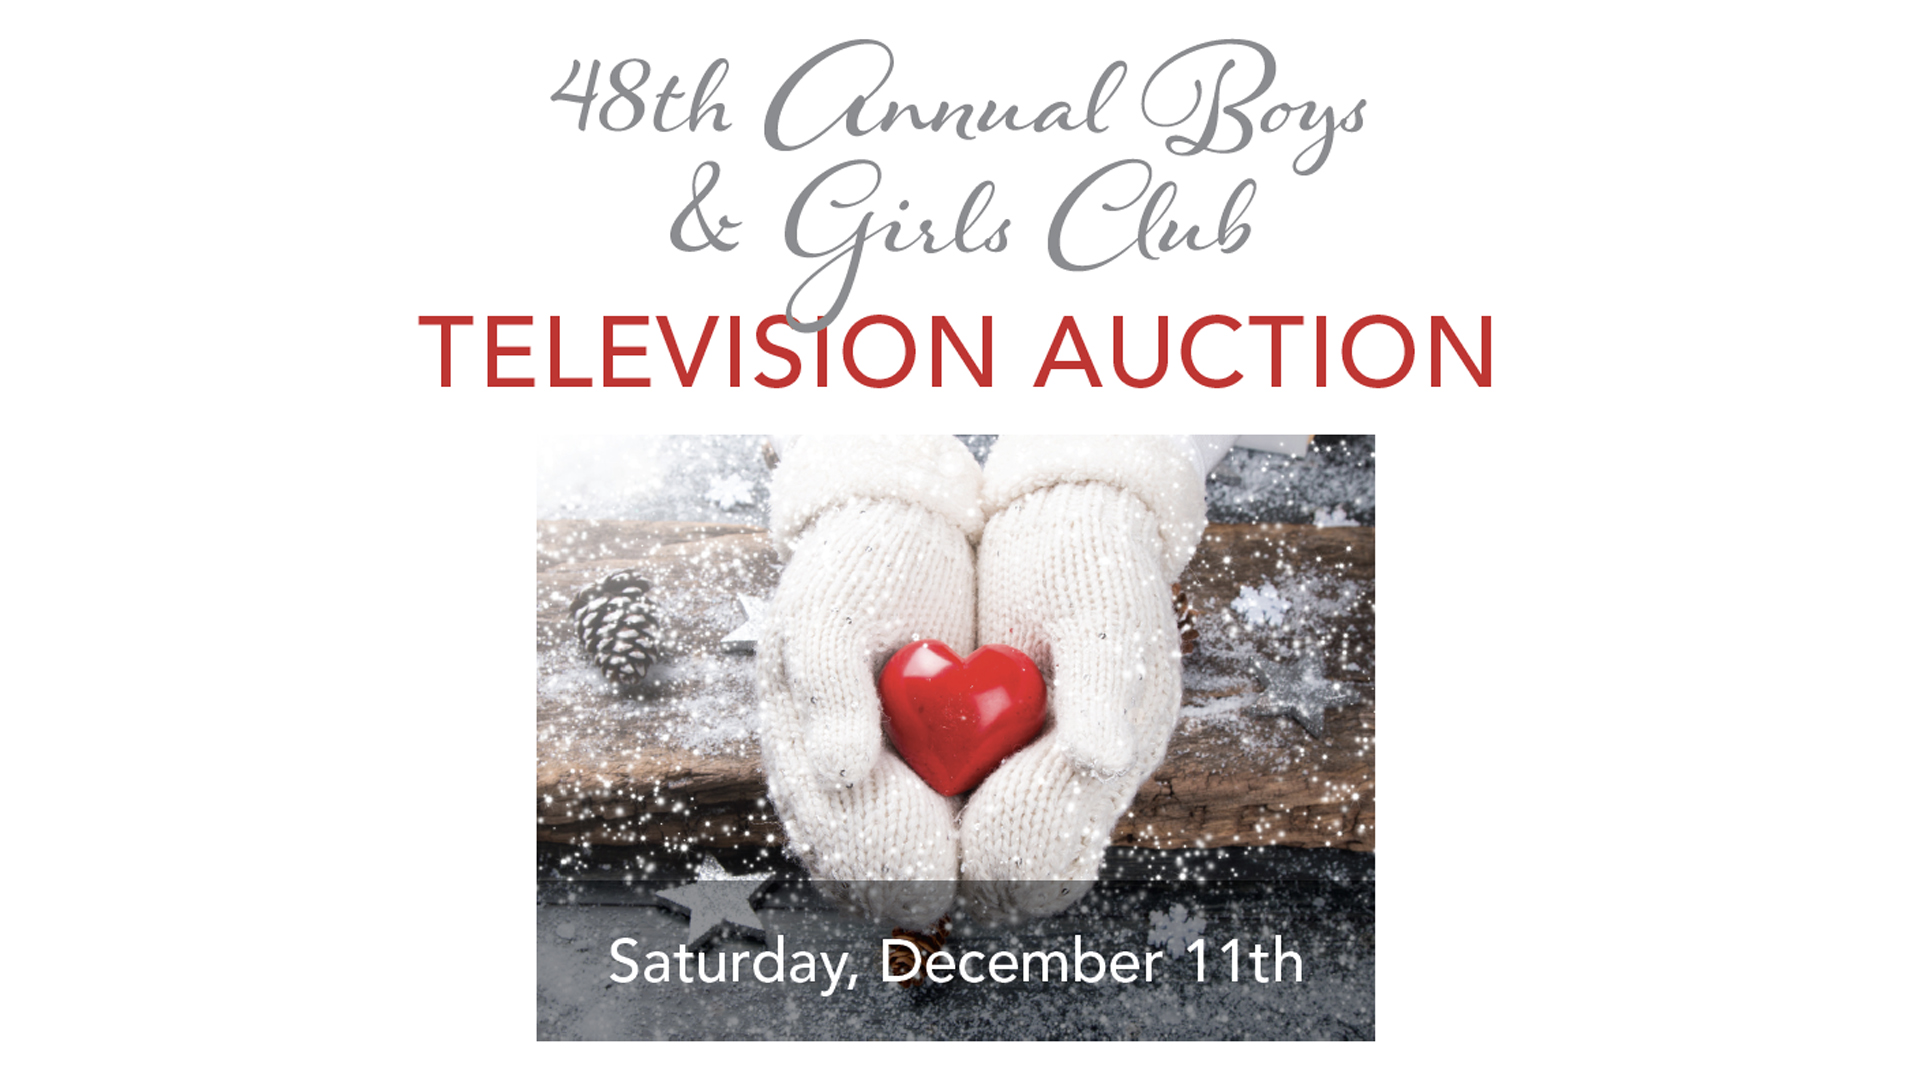 The 48th Annual Boys and Girls Clubs of Central NH Auction